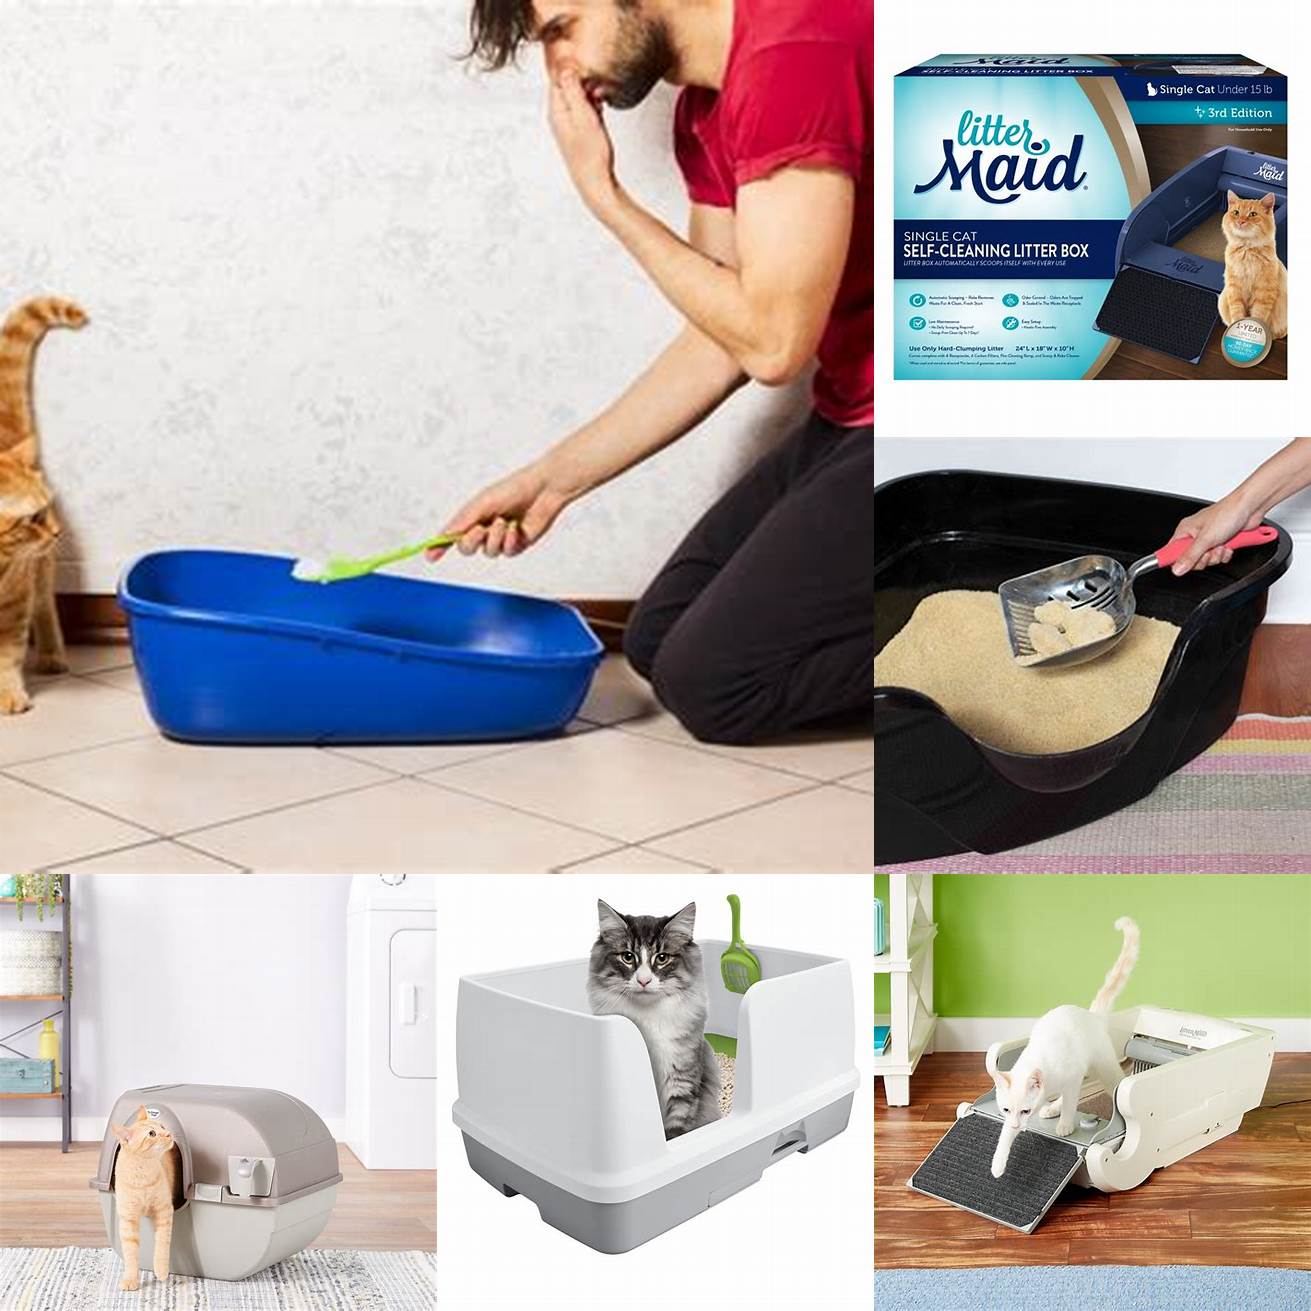 Clean the Litter Box Regularly